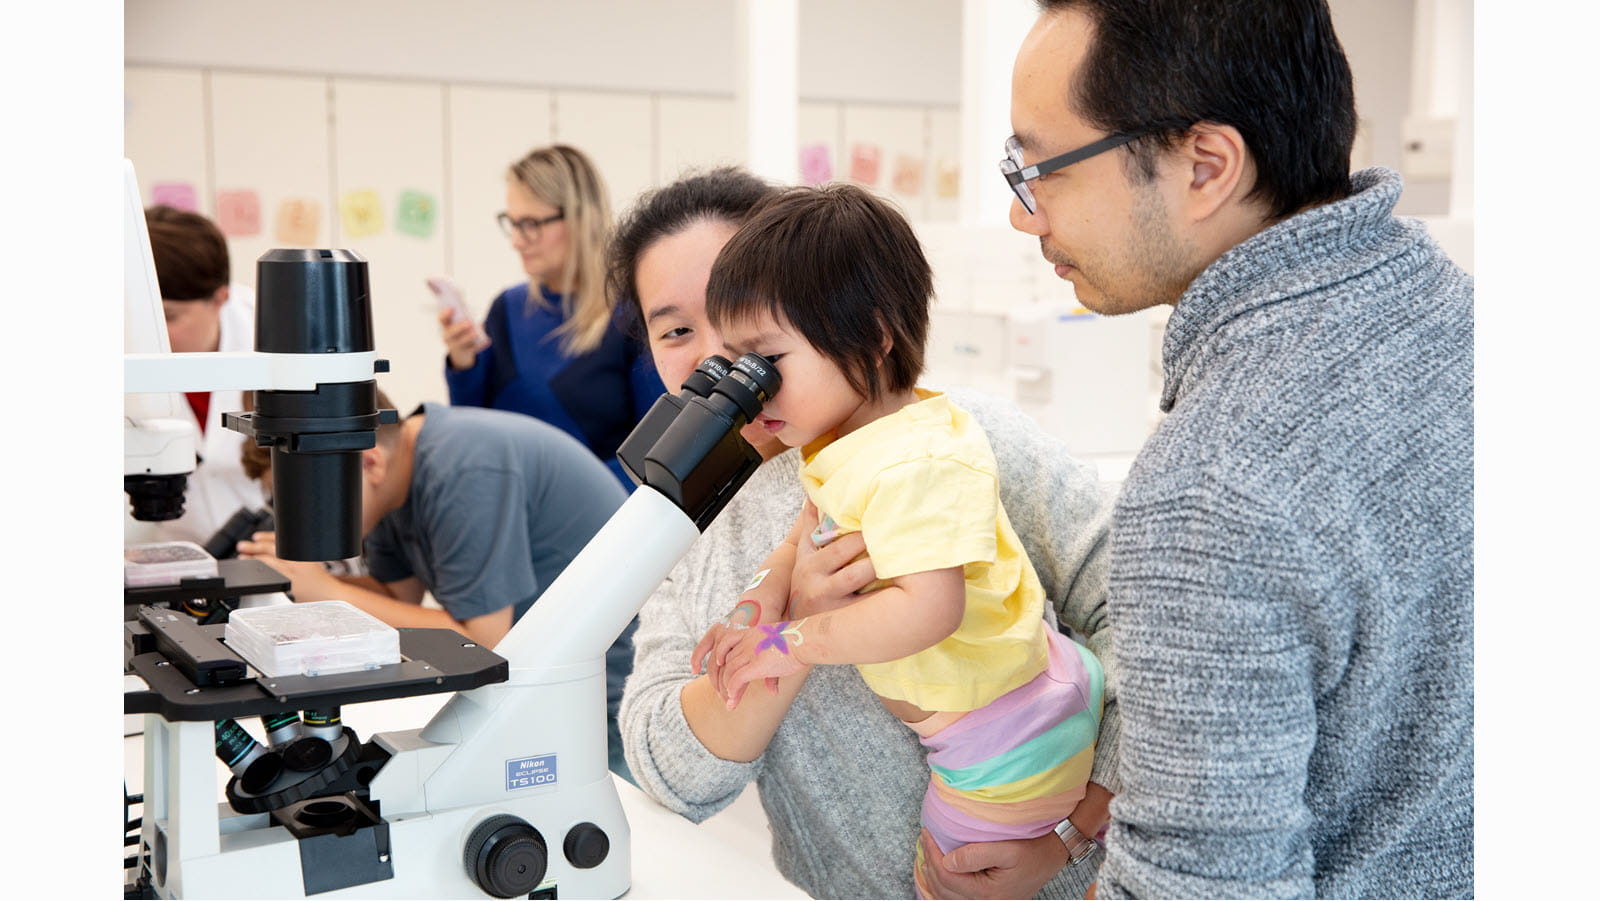 Parents of a toddler hold her while she looks into a microscope